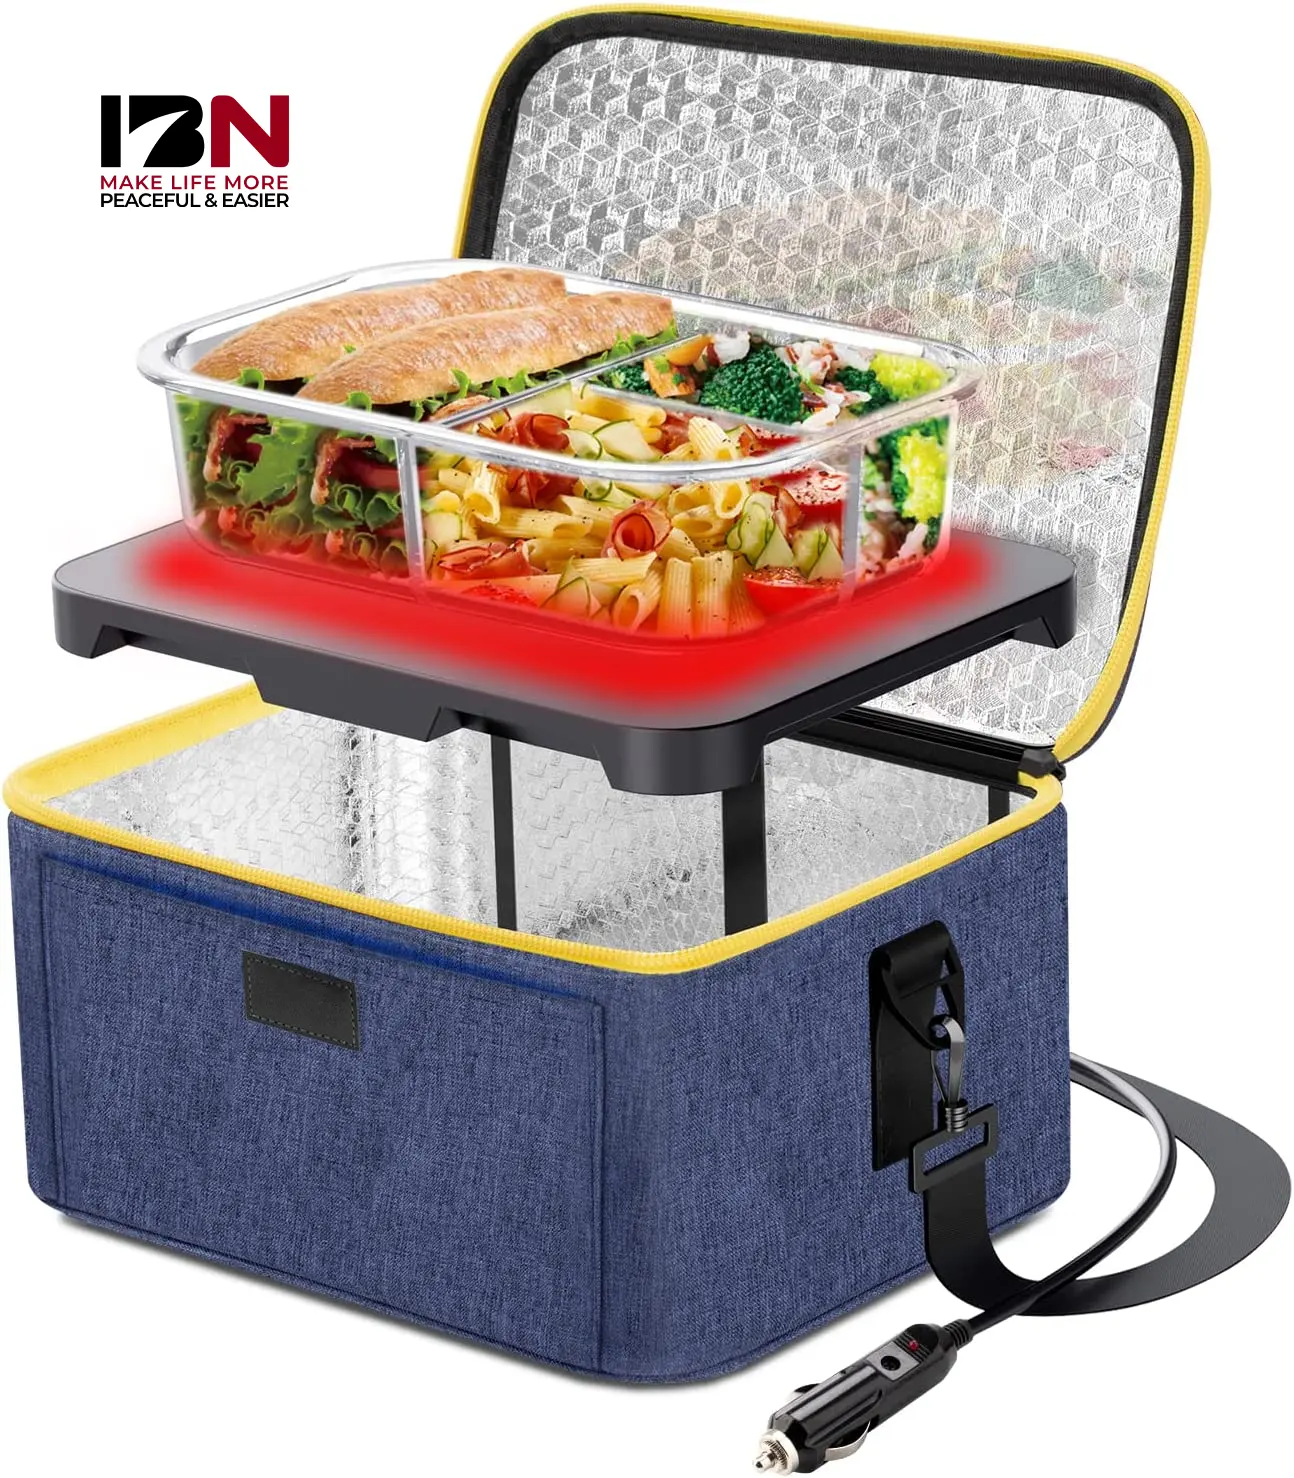 Portable Oven 24V 70W Electric Heating Lunch Box for Work Reheating and Cooking Meals Car Food Warmer